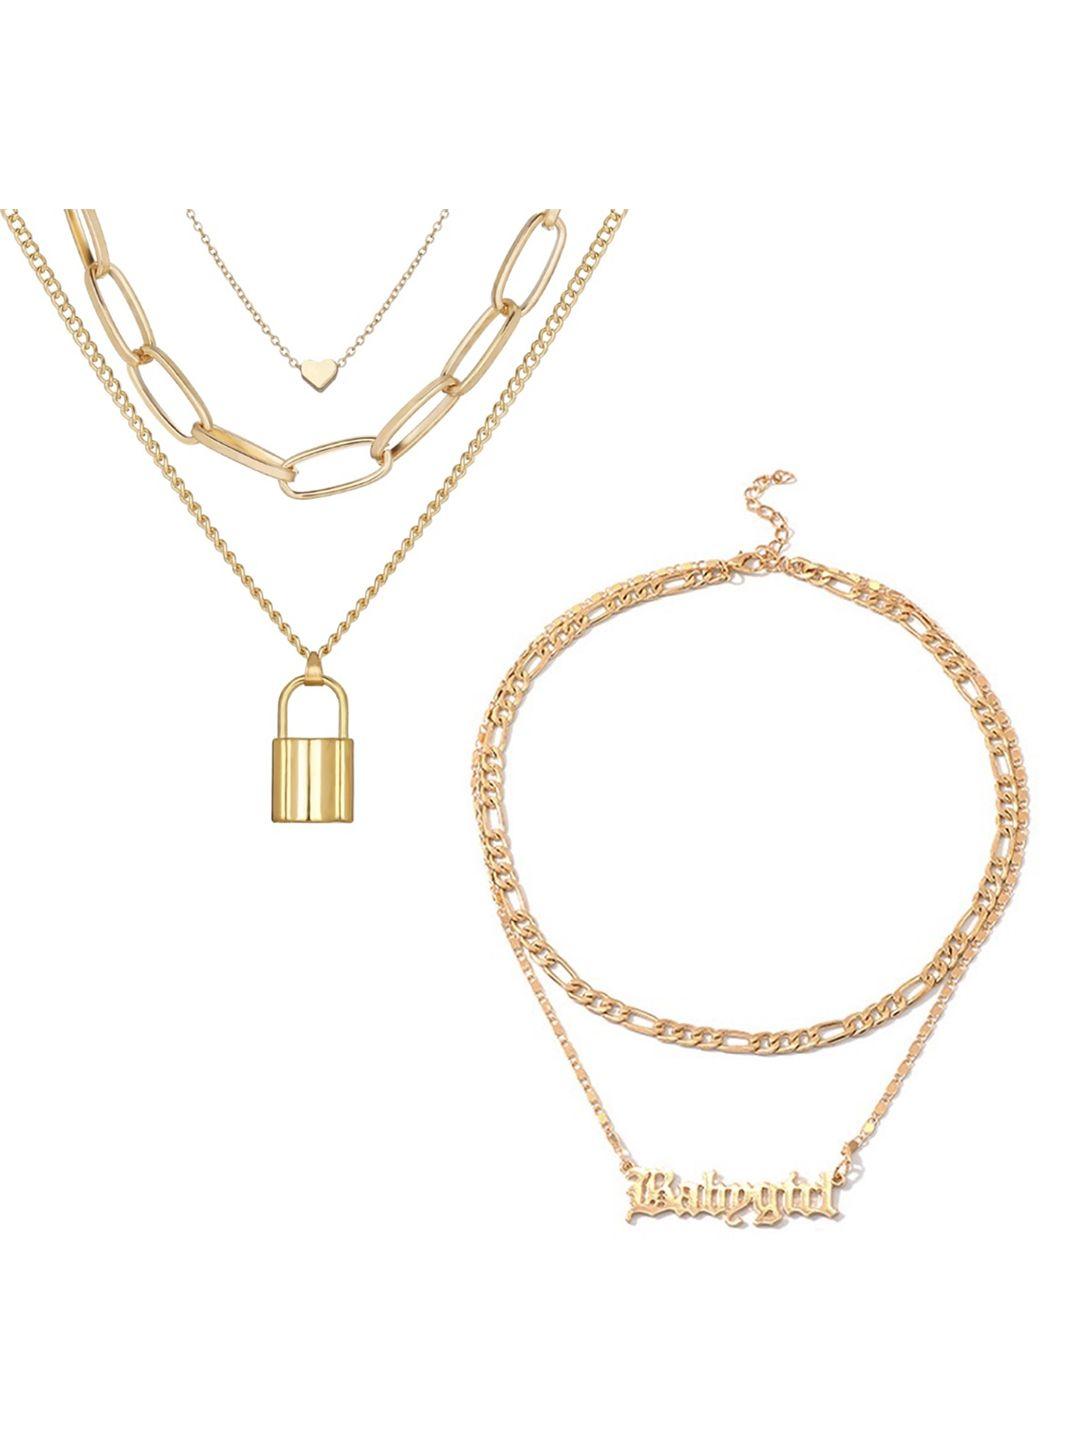 vembley set of 2 gold-plated layered heart lock & babygirl pendant necklace